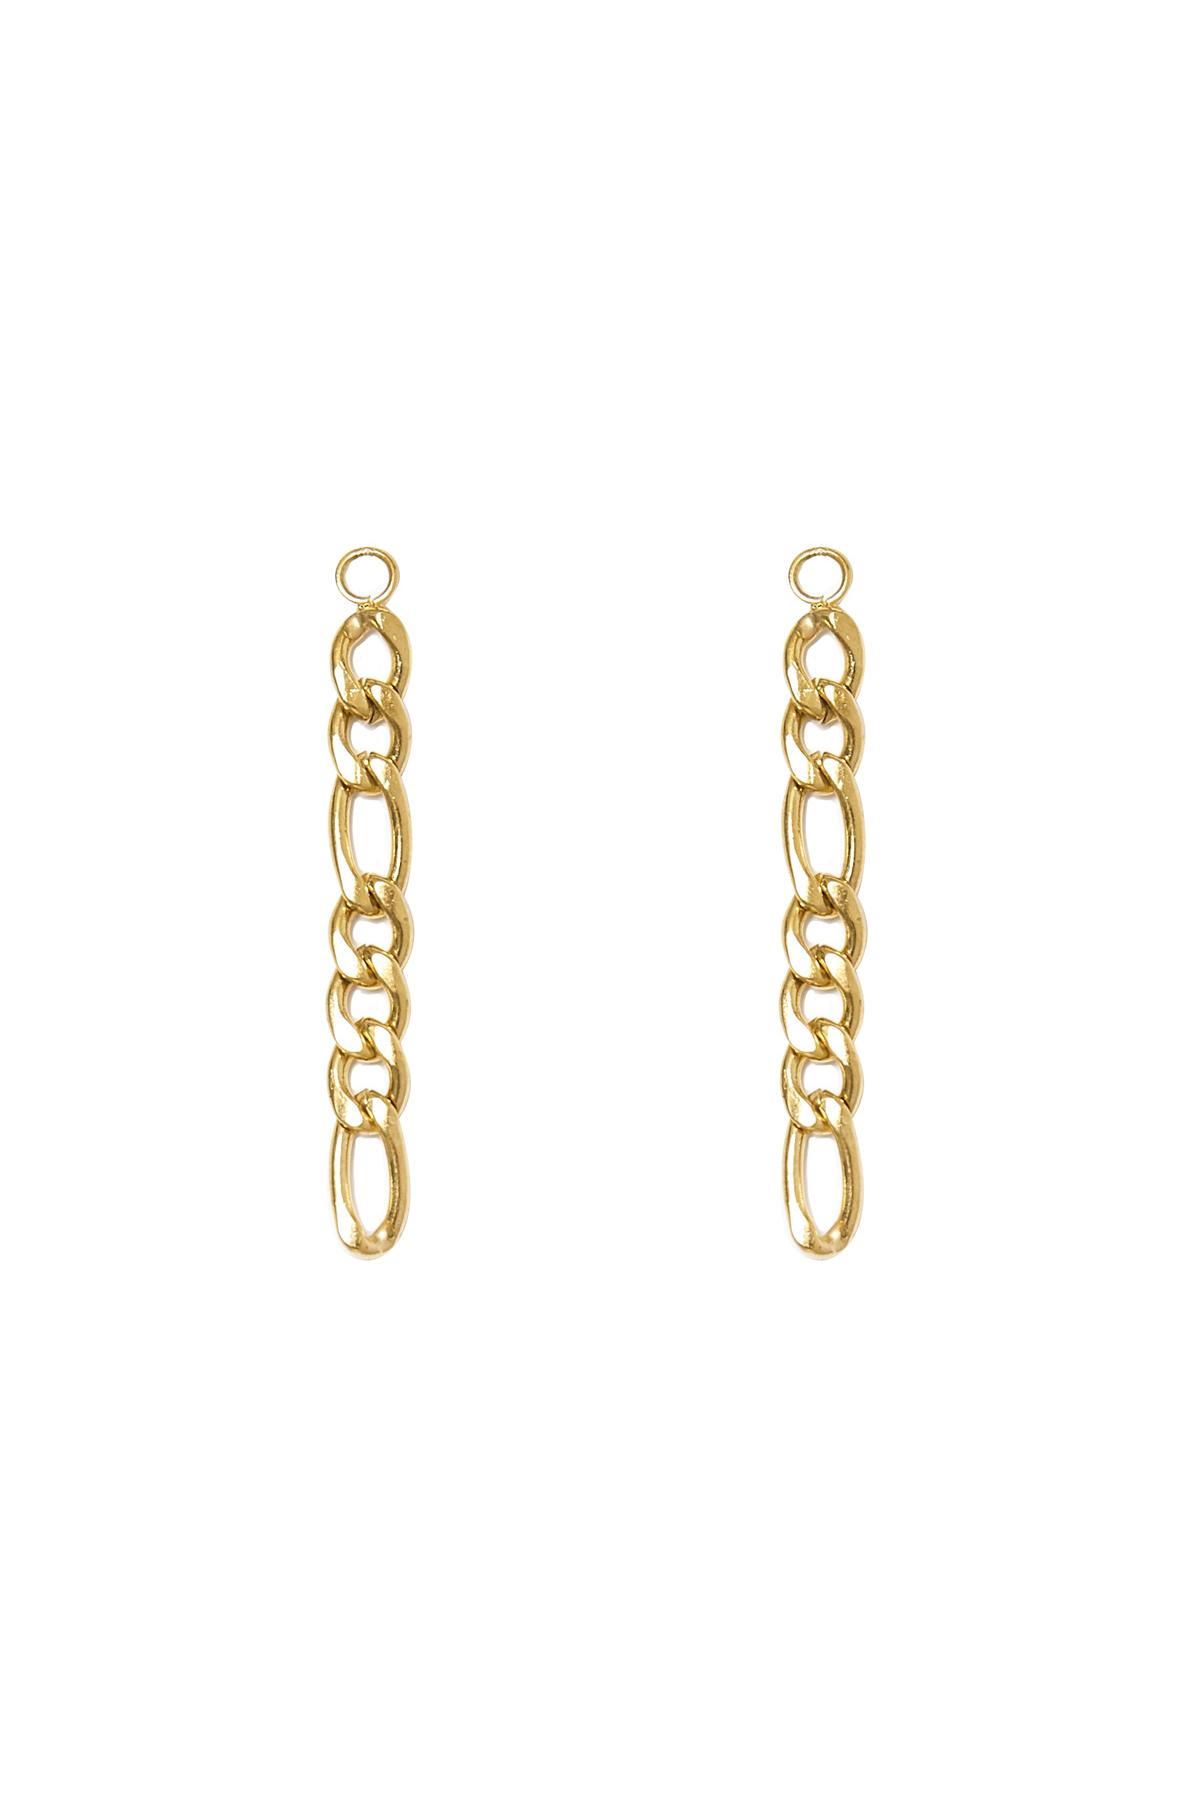 Ear Chain Creation 1 Gold Stainless Steel h5 